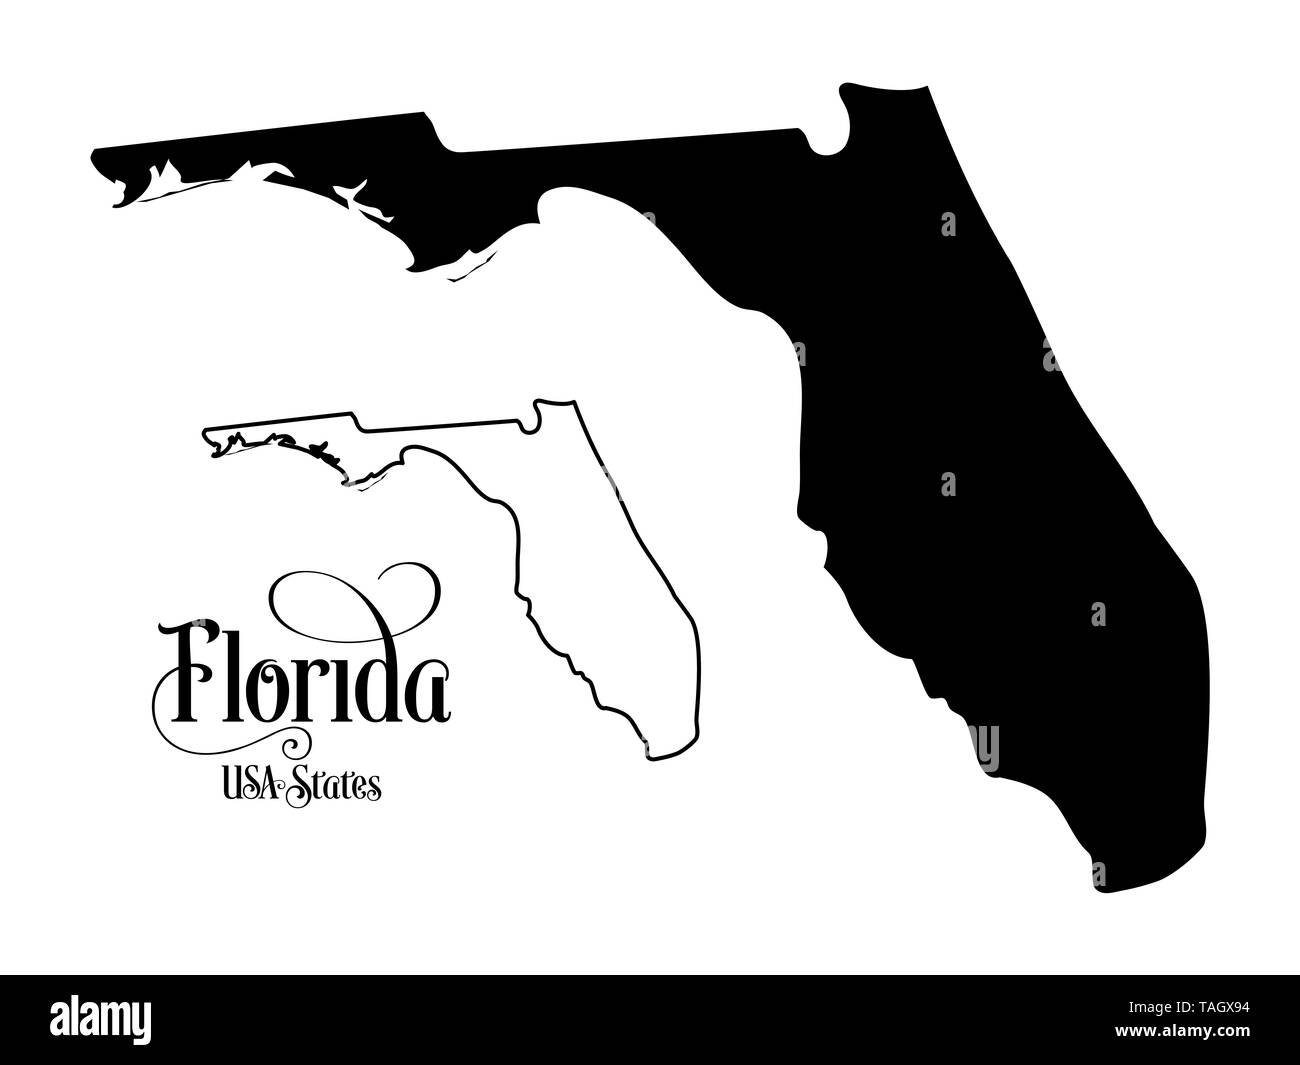 Map of The United States of America (USA) State of Florida - Illustration on White Background. Stock Photo